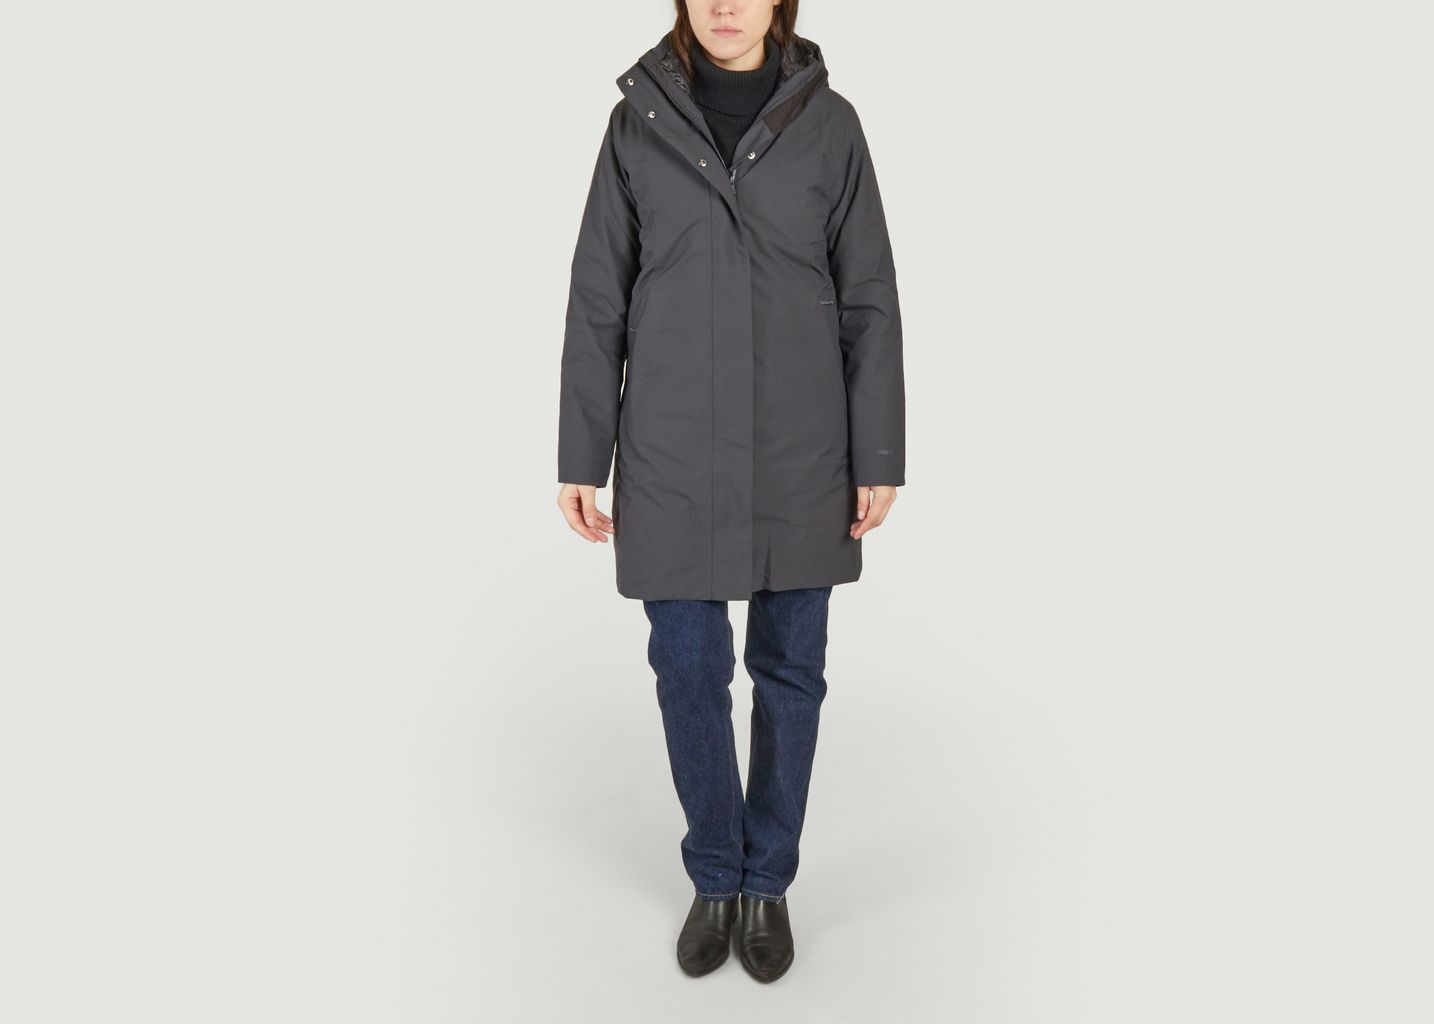 Parka Tres 3 in 1 - Patagonia